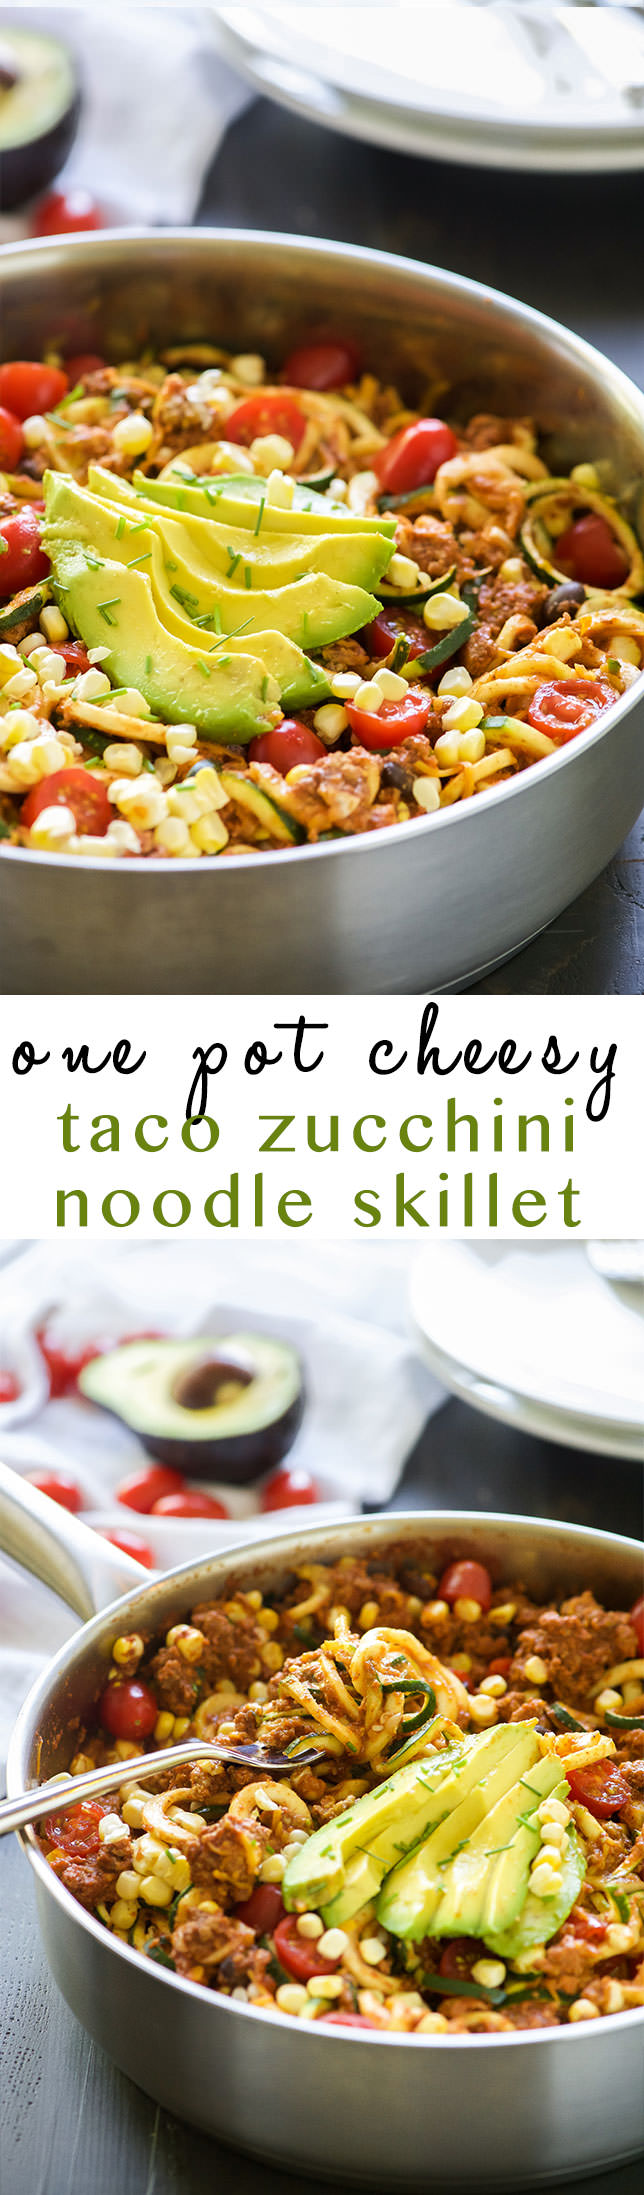 One Pot Cheesy Taco Zucchini Noodle Skillet is a healthy spin on Taco Tuesday! Zucchini noodles, enchilada spiced ground turkey, black beans, corn and creamy avocado help makeover this dish! 